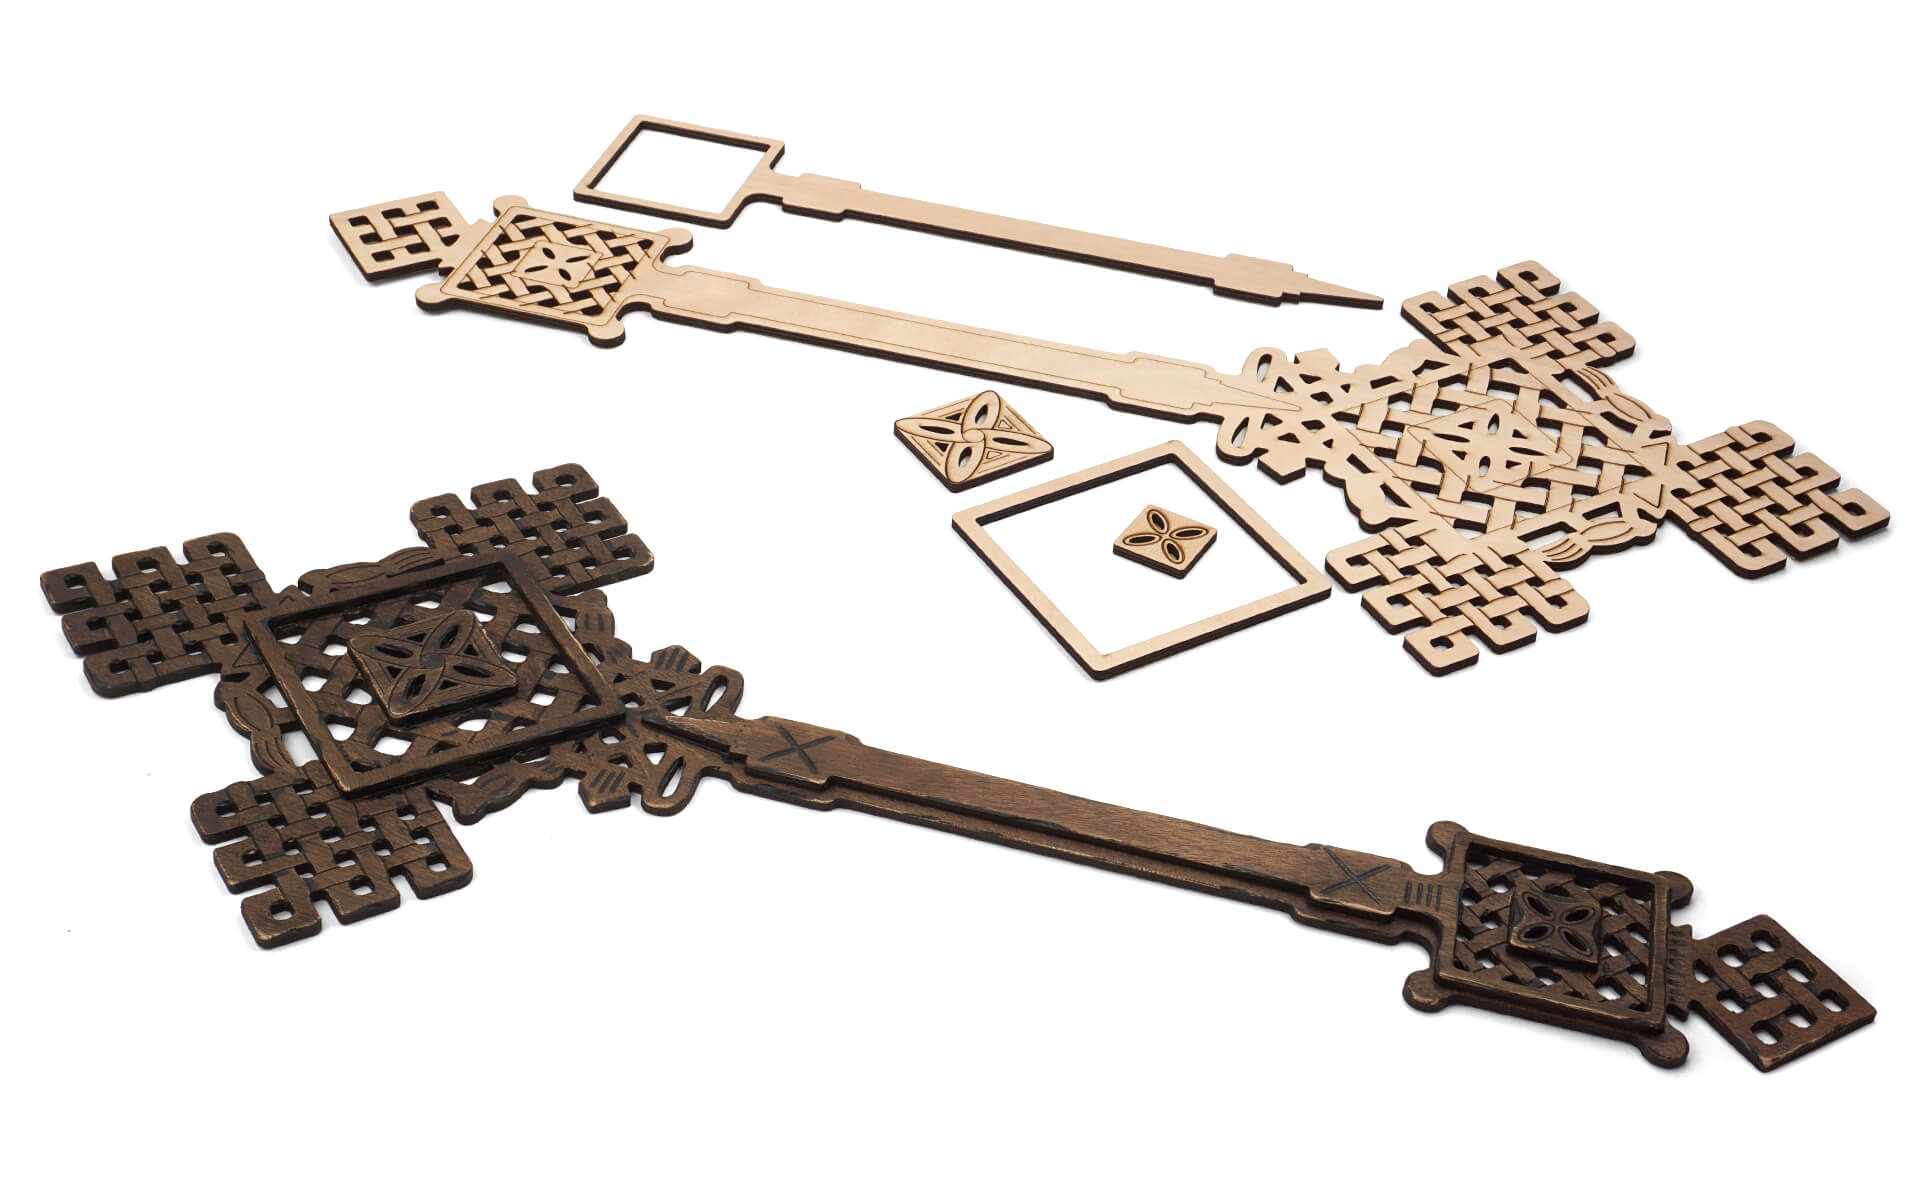 A detailed ethiopian cross made up of laser-cut layers of wood